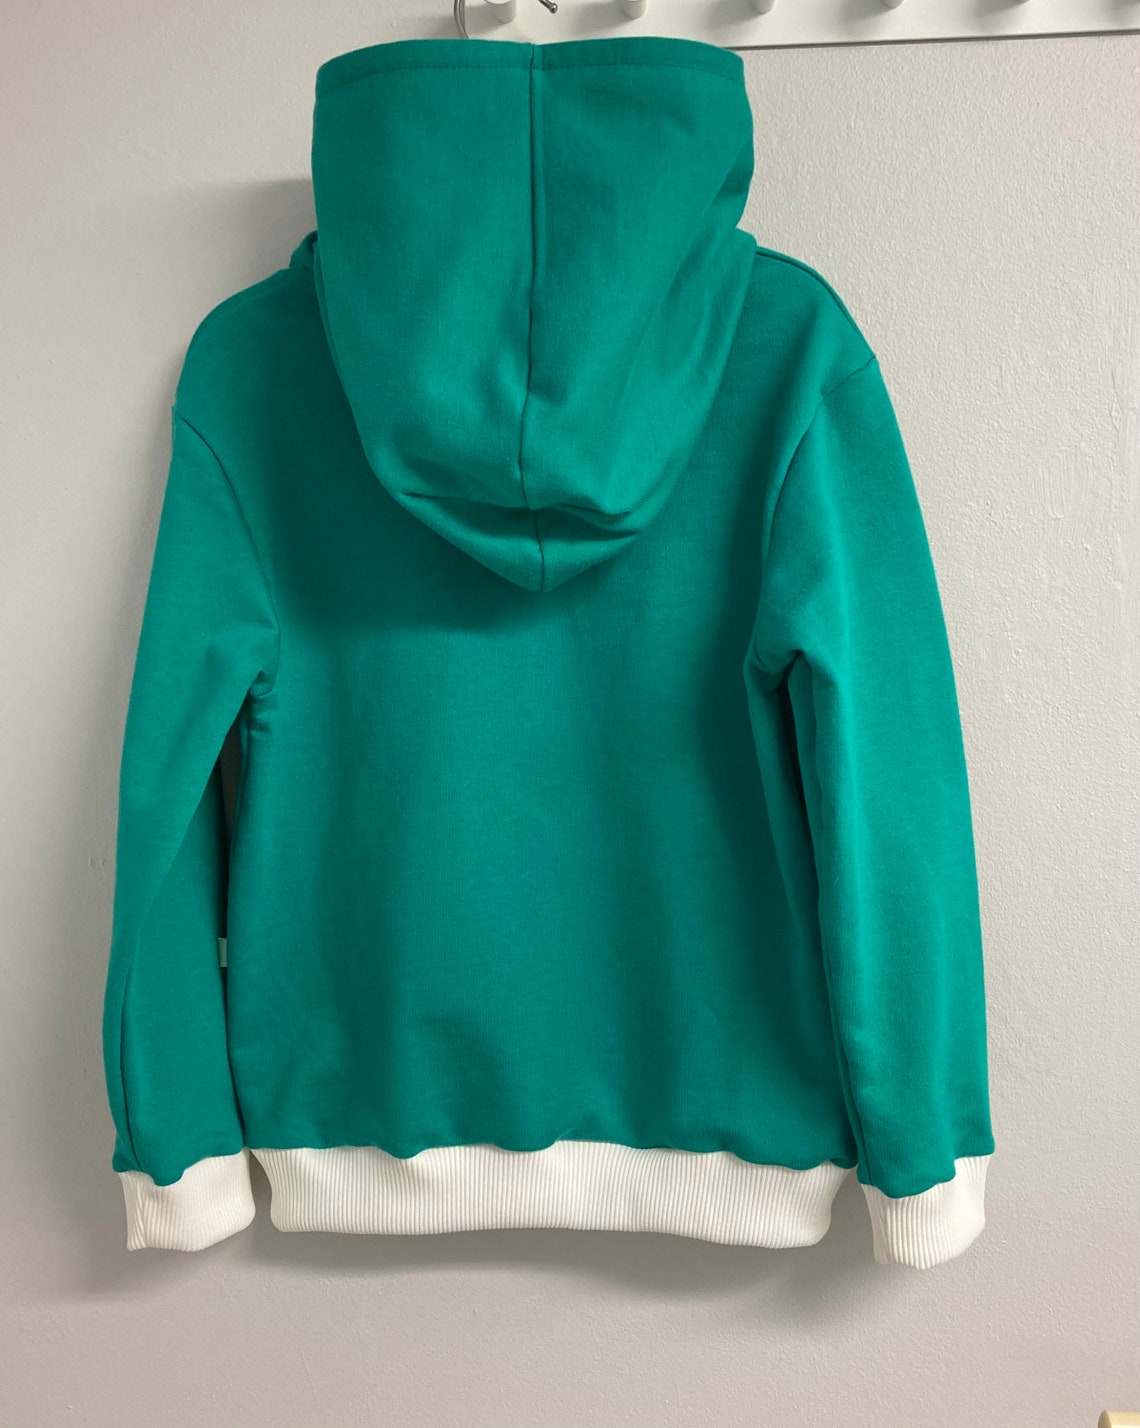 Hoodie Sweater Emerald Green Size 5-6 Years - Etsy